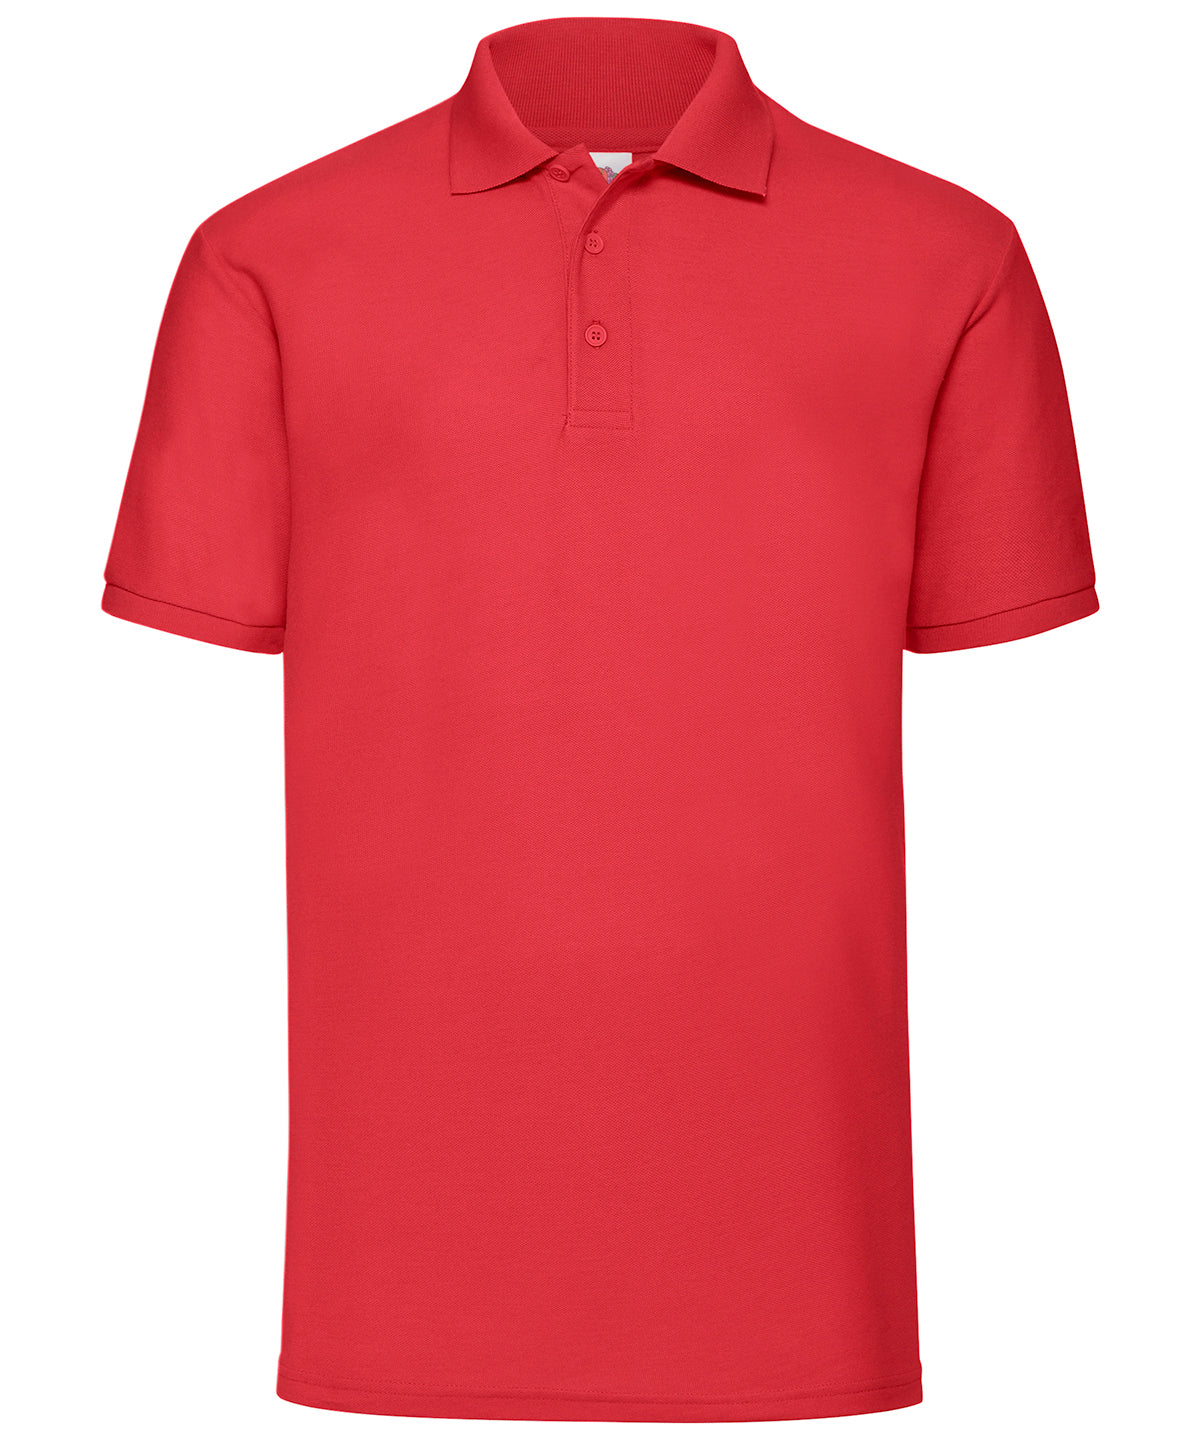 Personalised Polo Shirts - Burgundy Fruit of the Loom 65/35 Polo